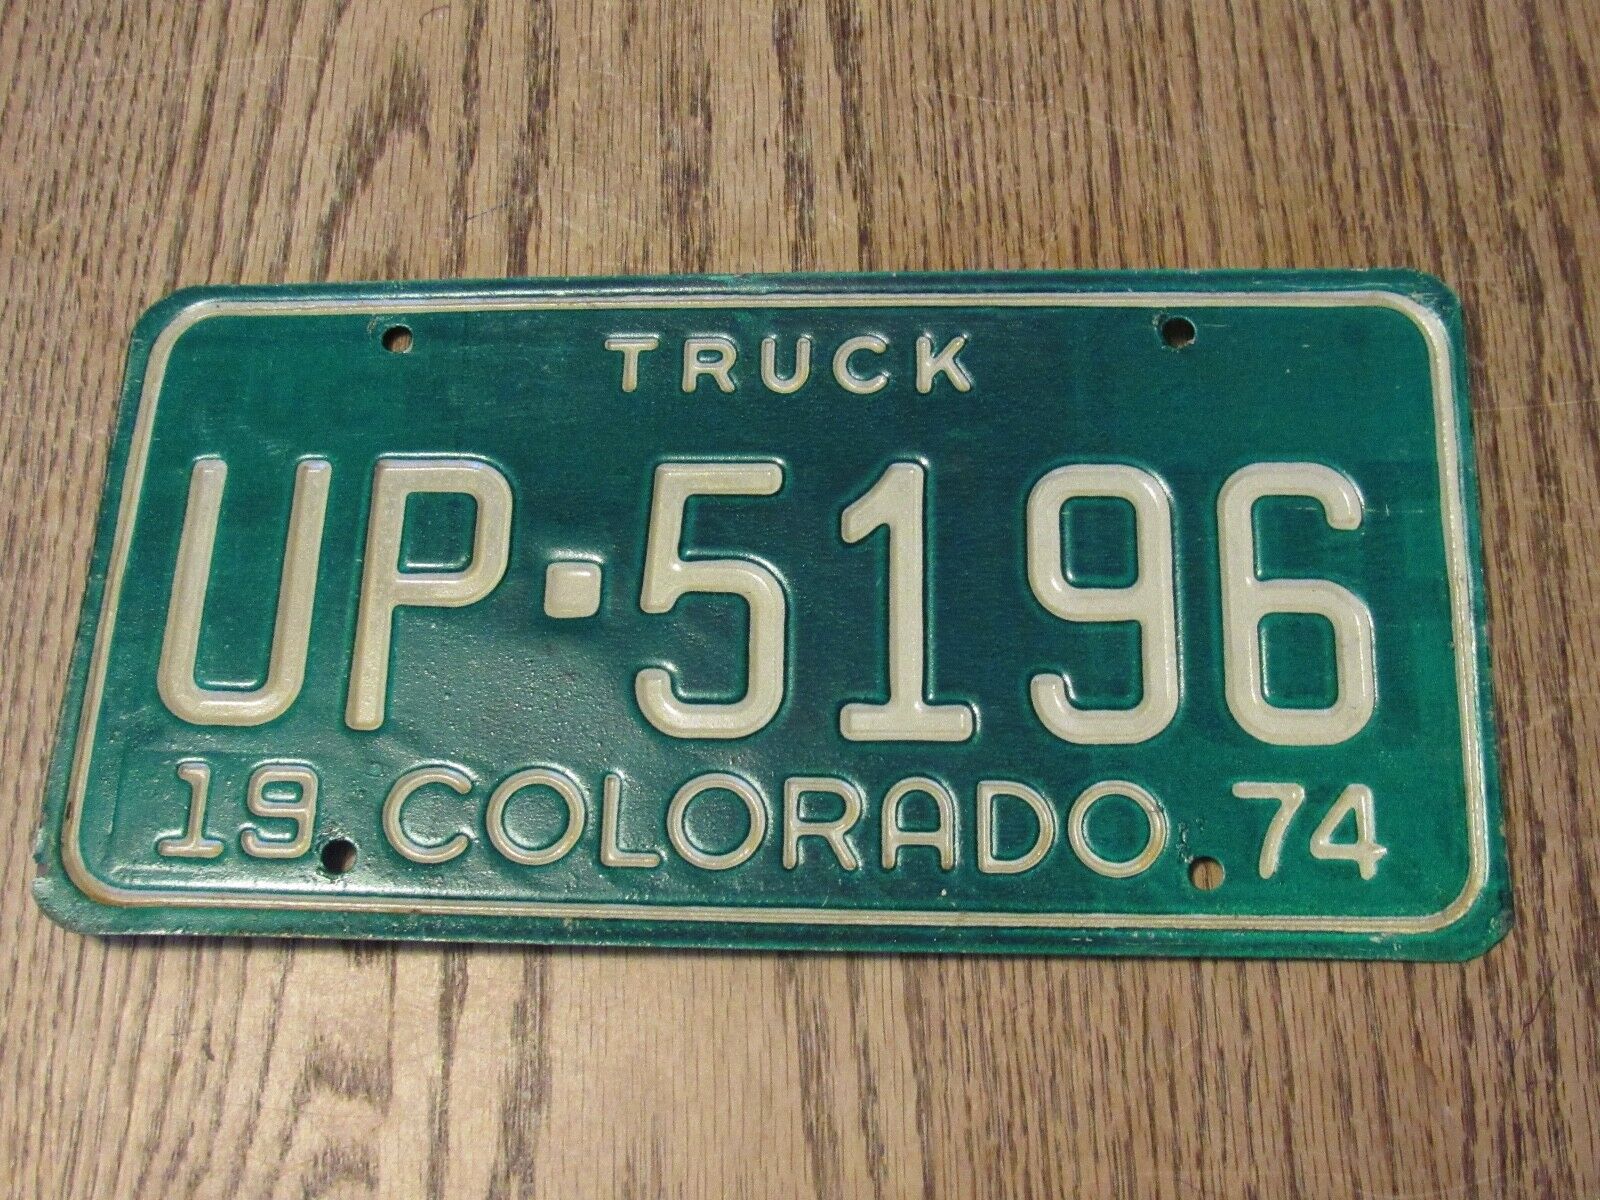 1974 Colorado Truck License Plate, Up-5196 (fc1-2)